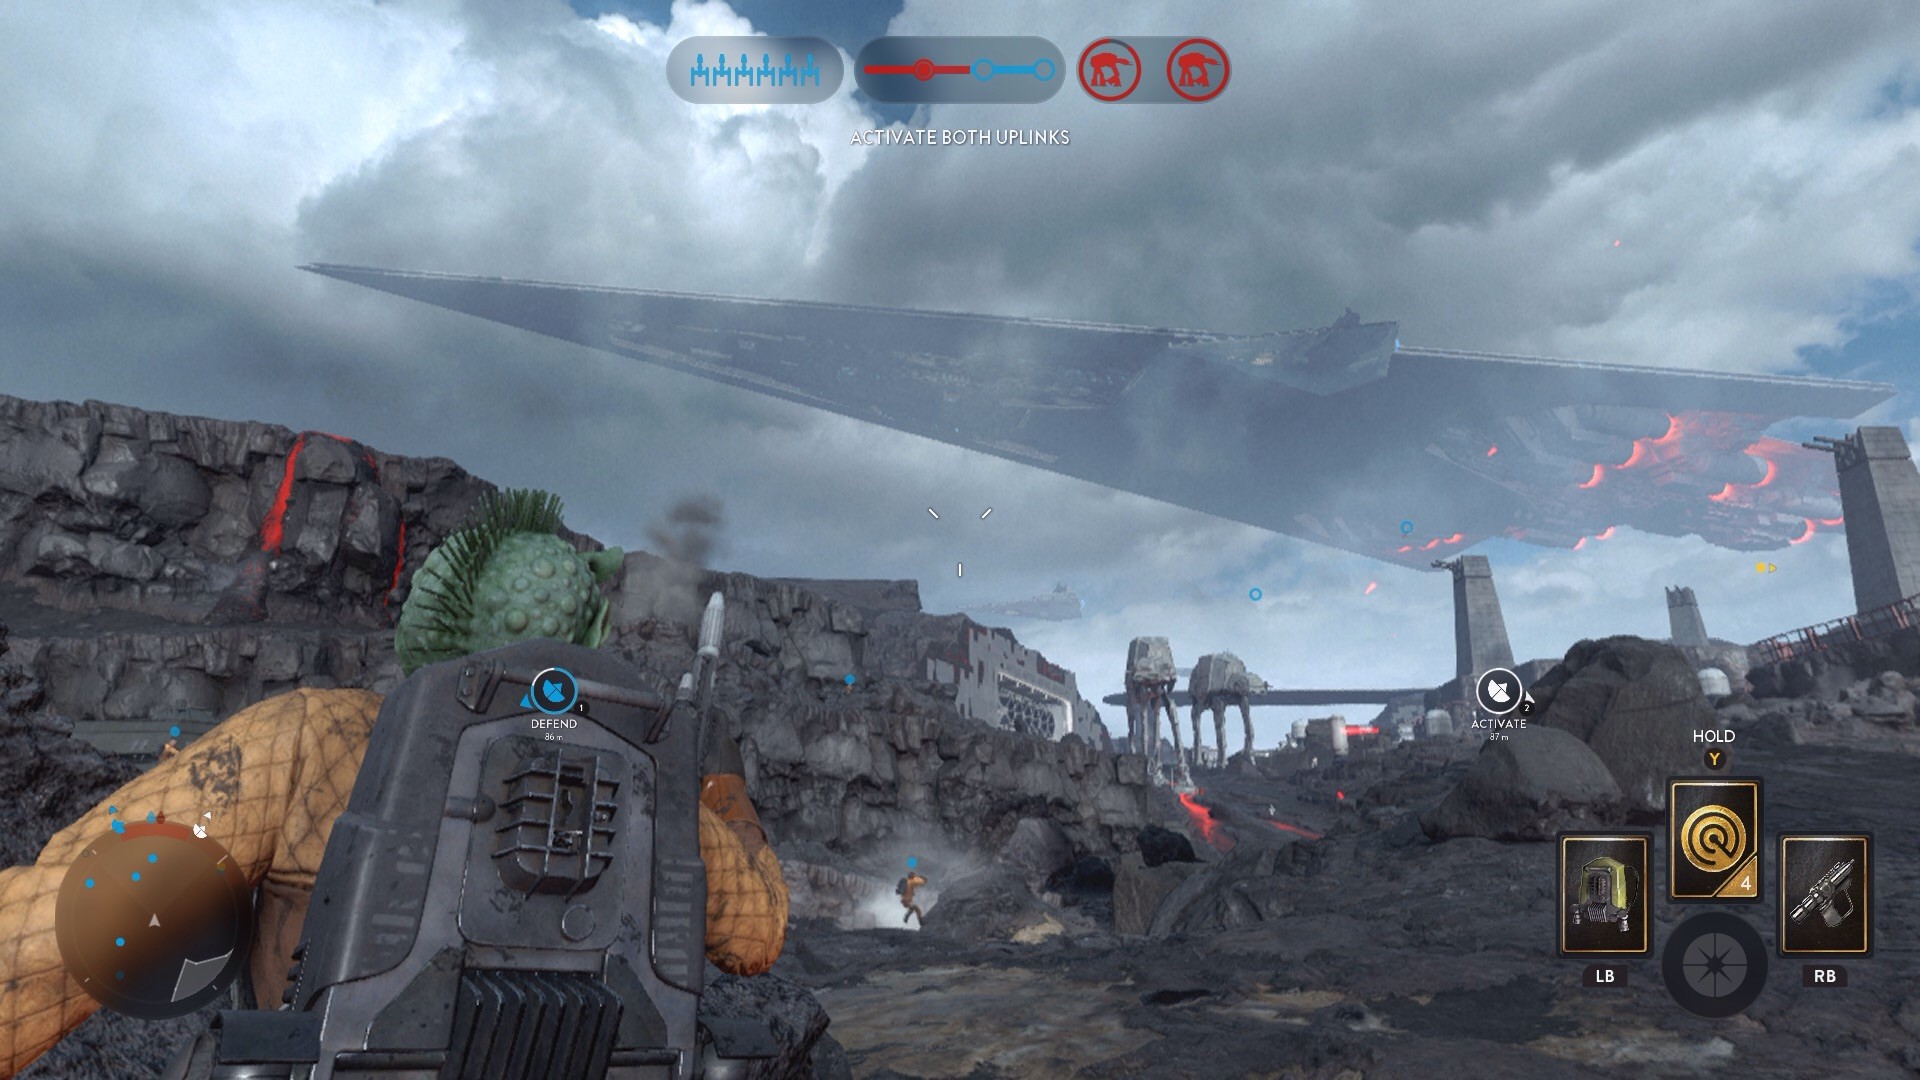 1920x1080 ... Super star destroyer above sullest. by jamsonic